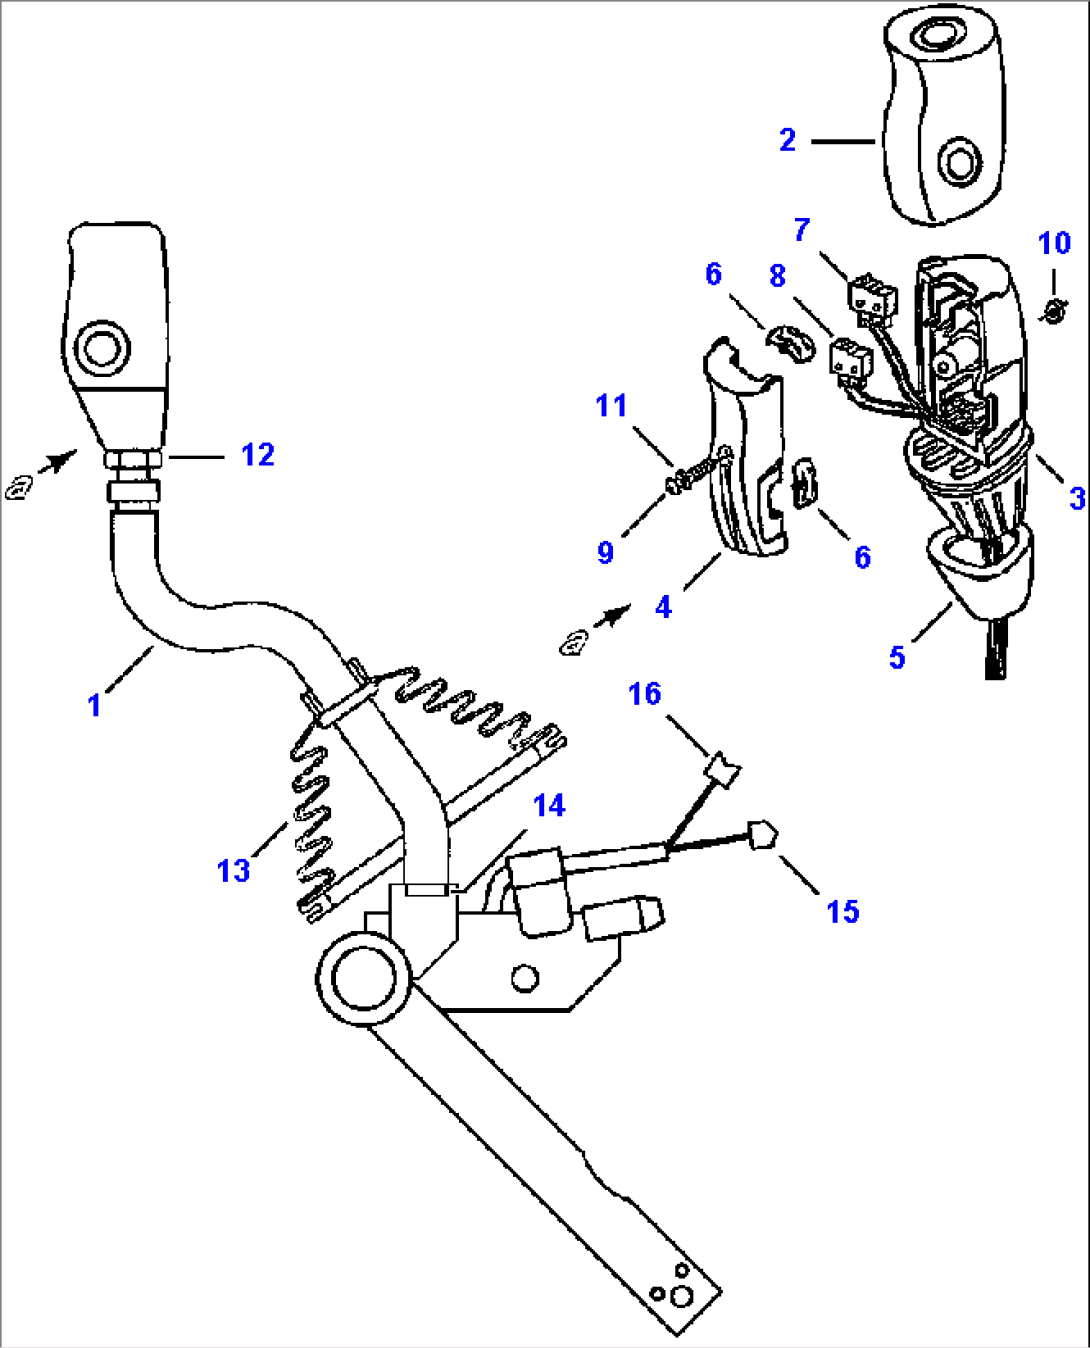 FIG NO. 6603 BOOM CONTROL LEVER WITH ECSS